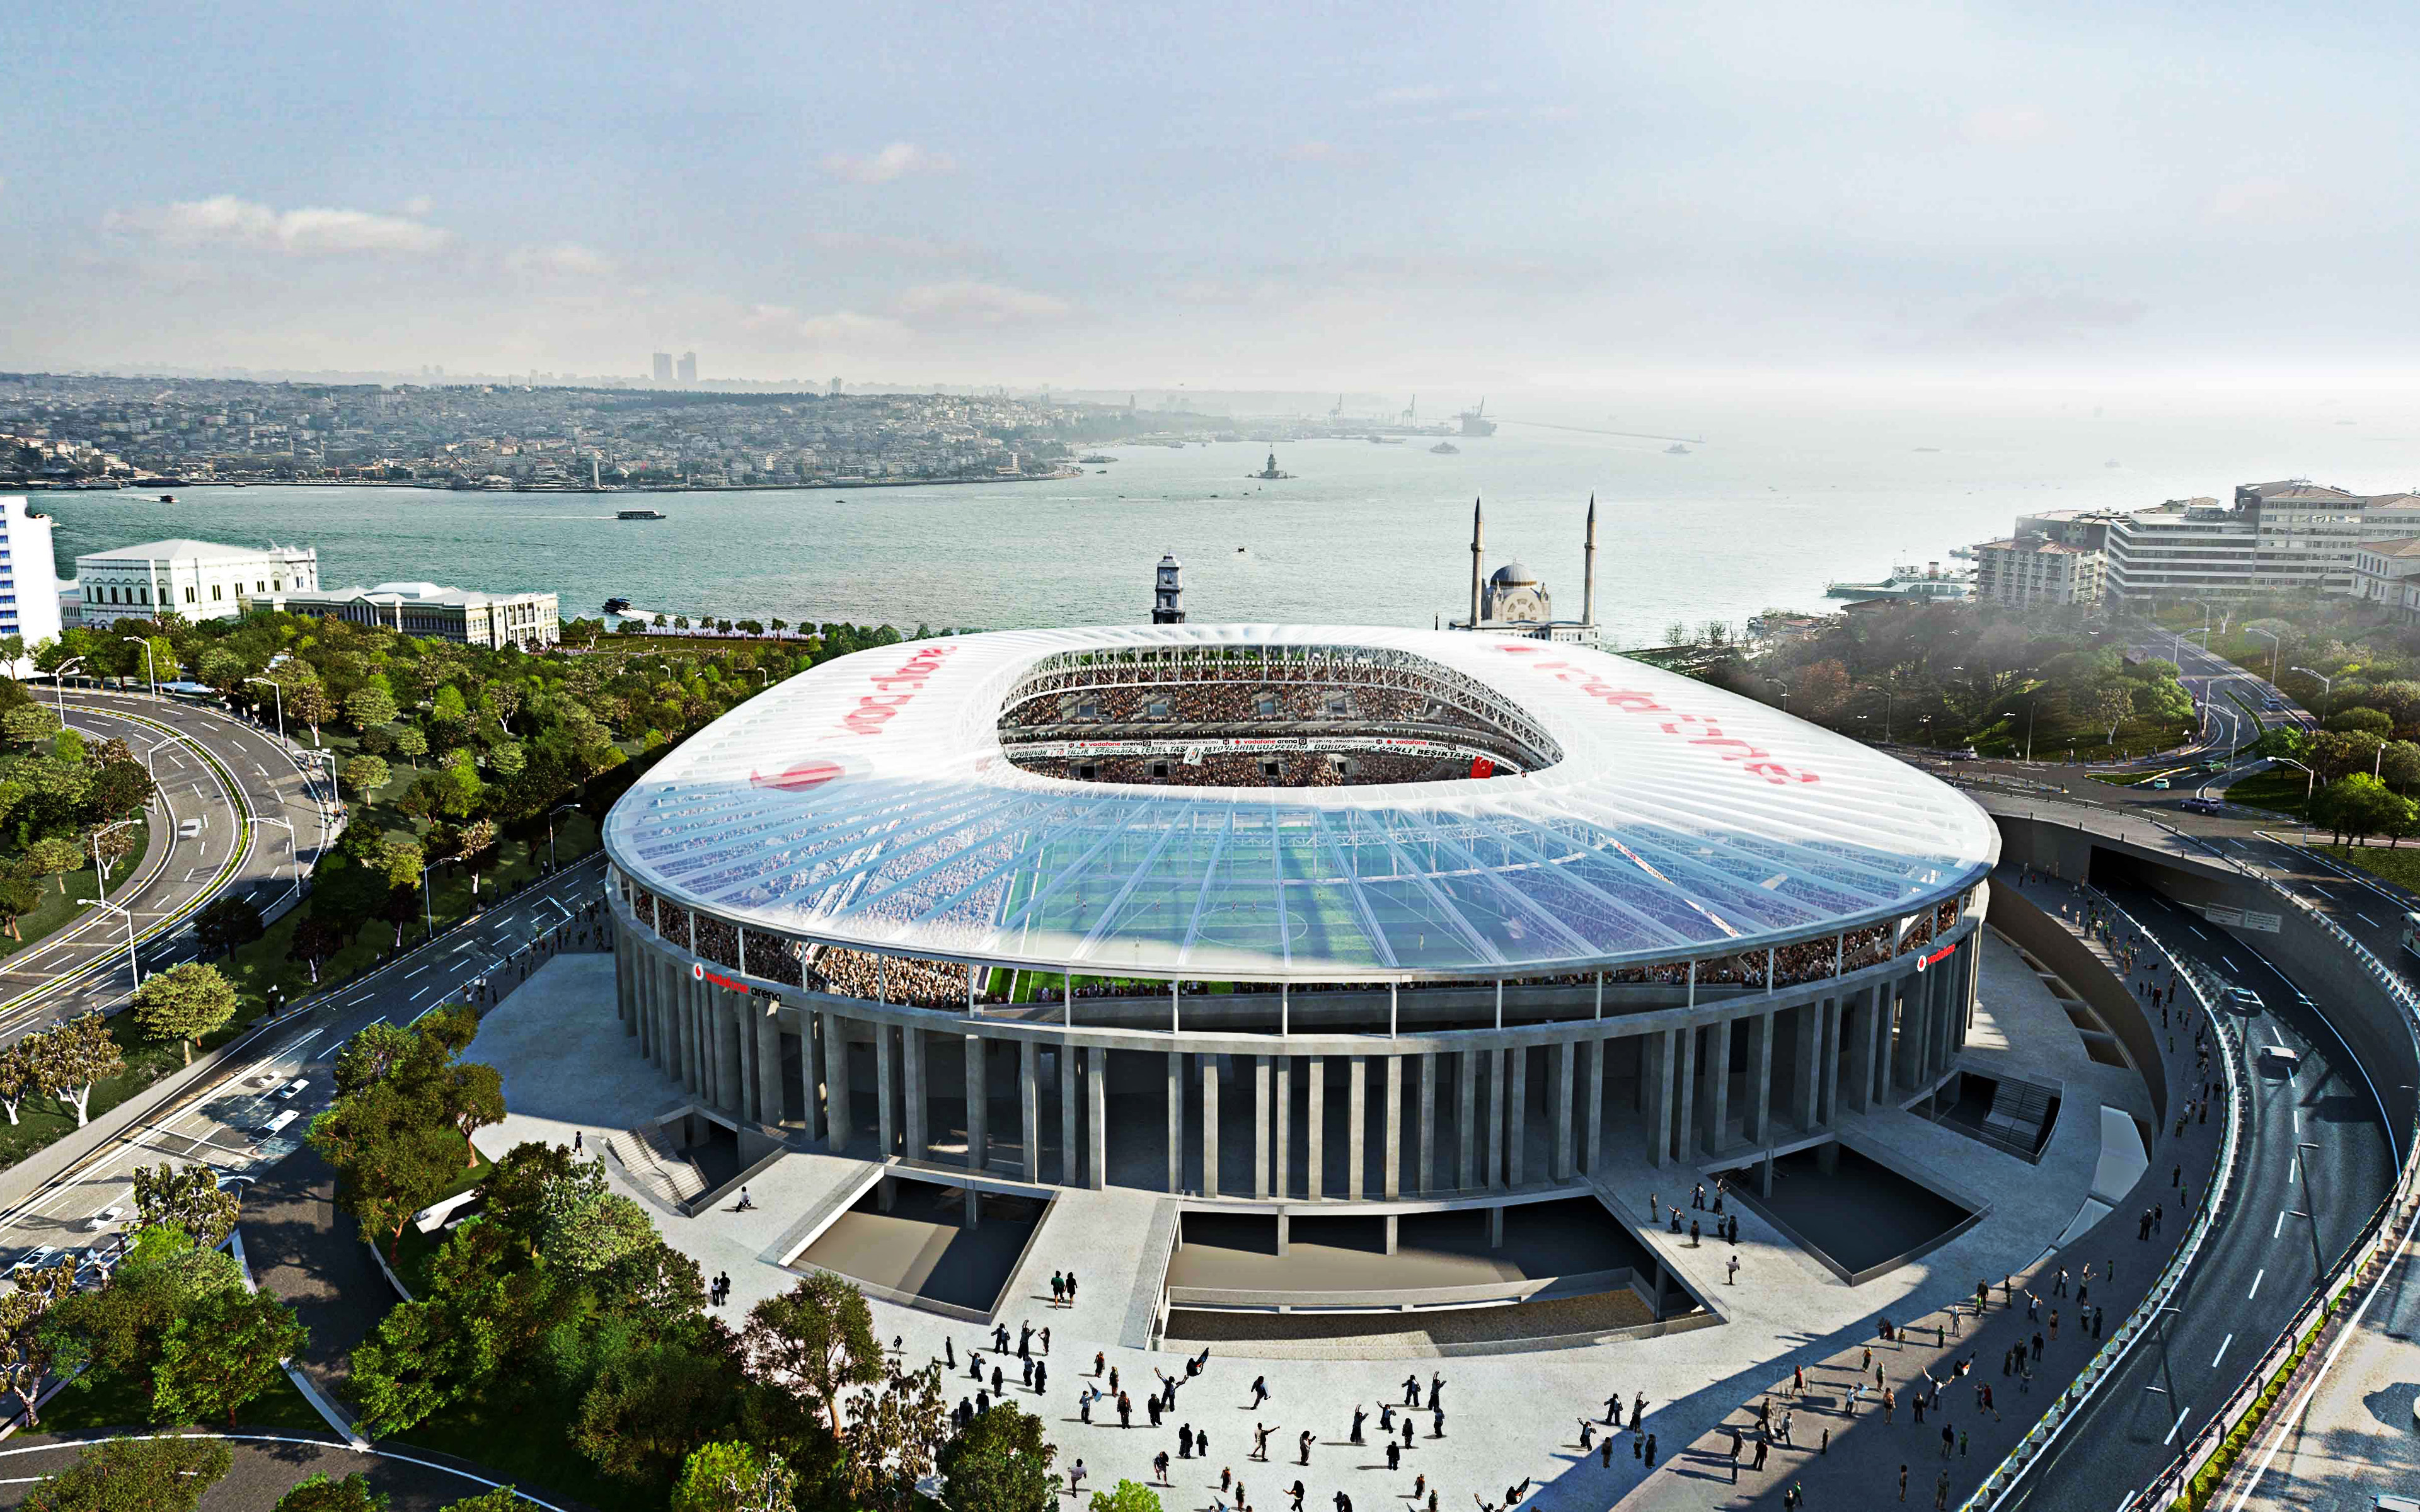 Download wallpaper 4k, Vodafone Park, aerial view, football stadium, BJK, Vodafone Arena, soccer, Besiktas stadium, Turkey, turkish stadiums, Besiktas for desktop with resolution 3840x2400. High Quality HD picture wallpaper